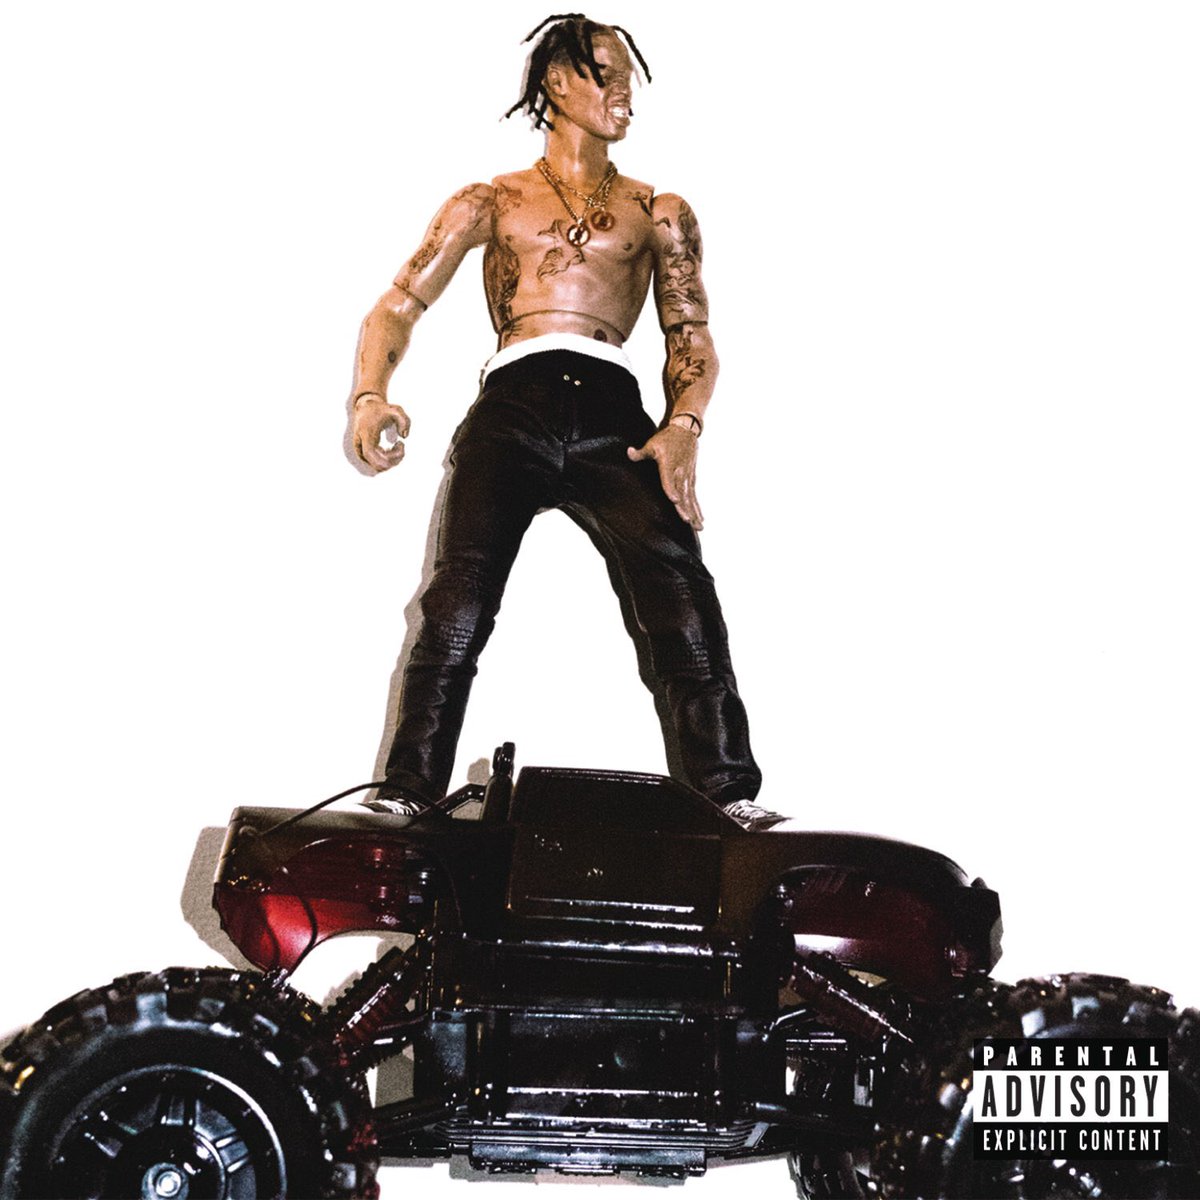 42. Travis Scott - RodeoThe way hedonism is conveyed and accentuated on this album is thrilling. The heavy psychedelic uses of guitar and warped vocal effects create a sense of drugged-out ignorance to victorious effect. A loud, futuristic and immersive experience.